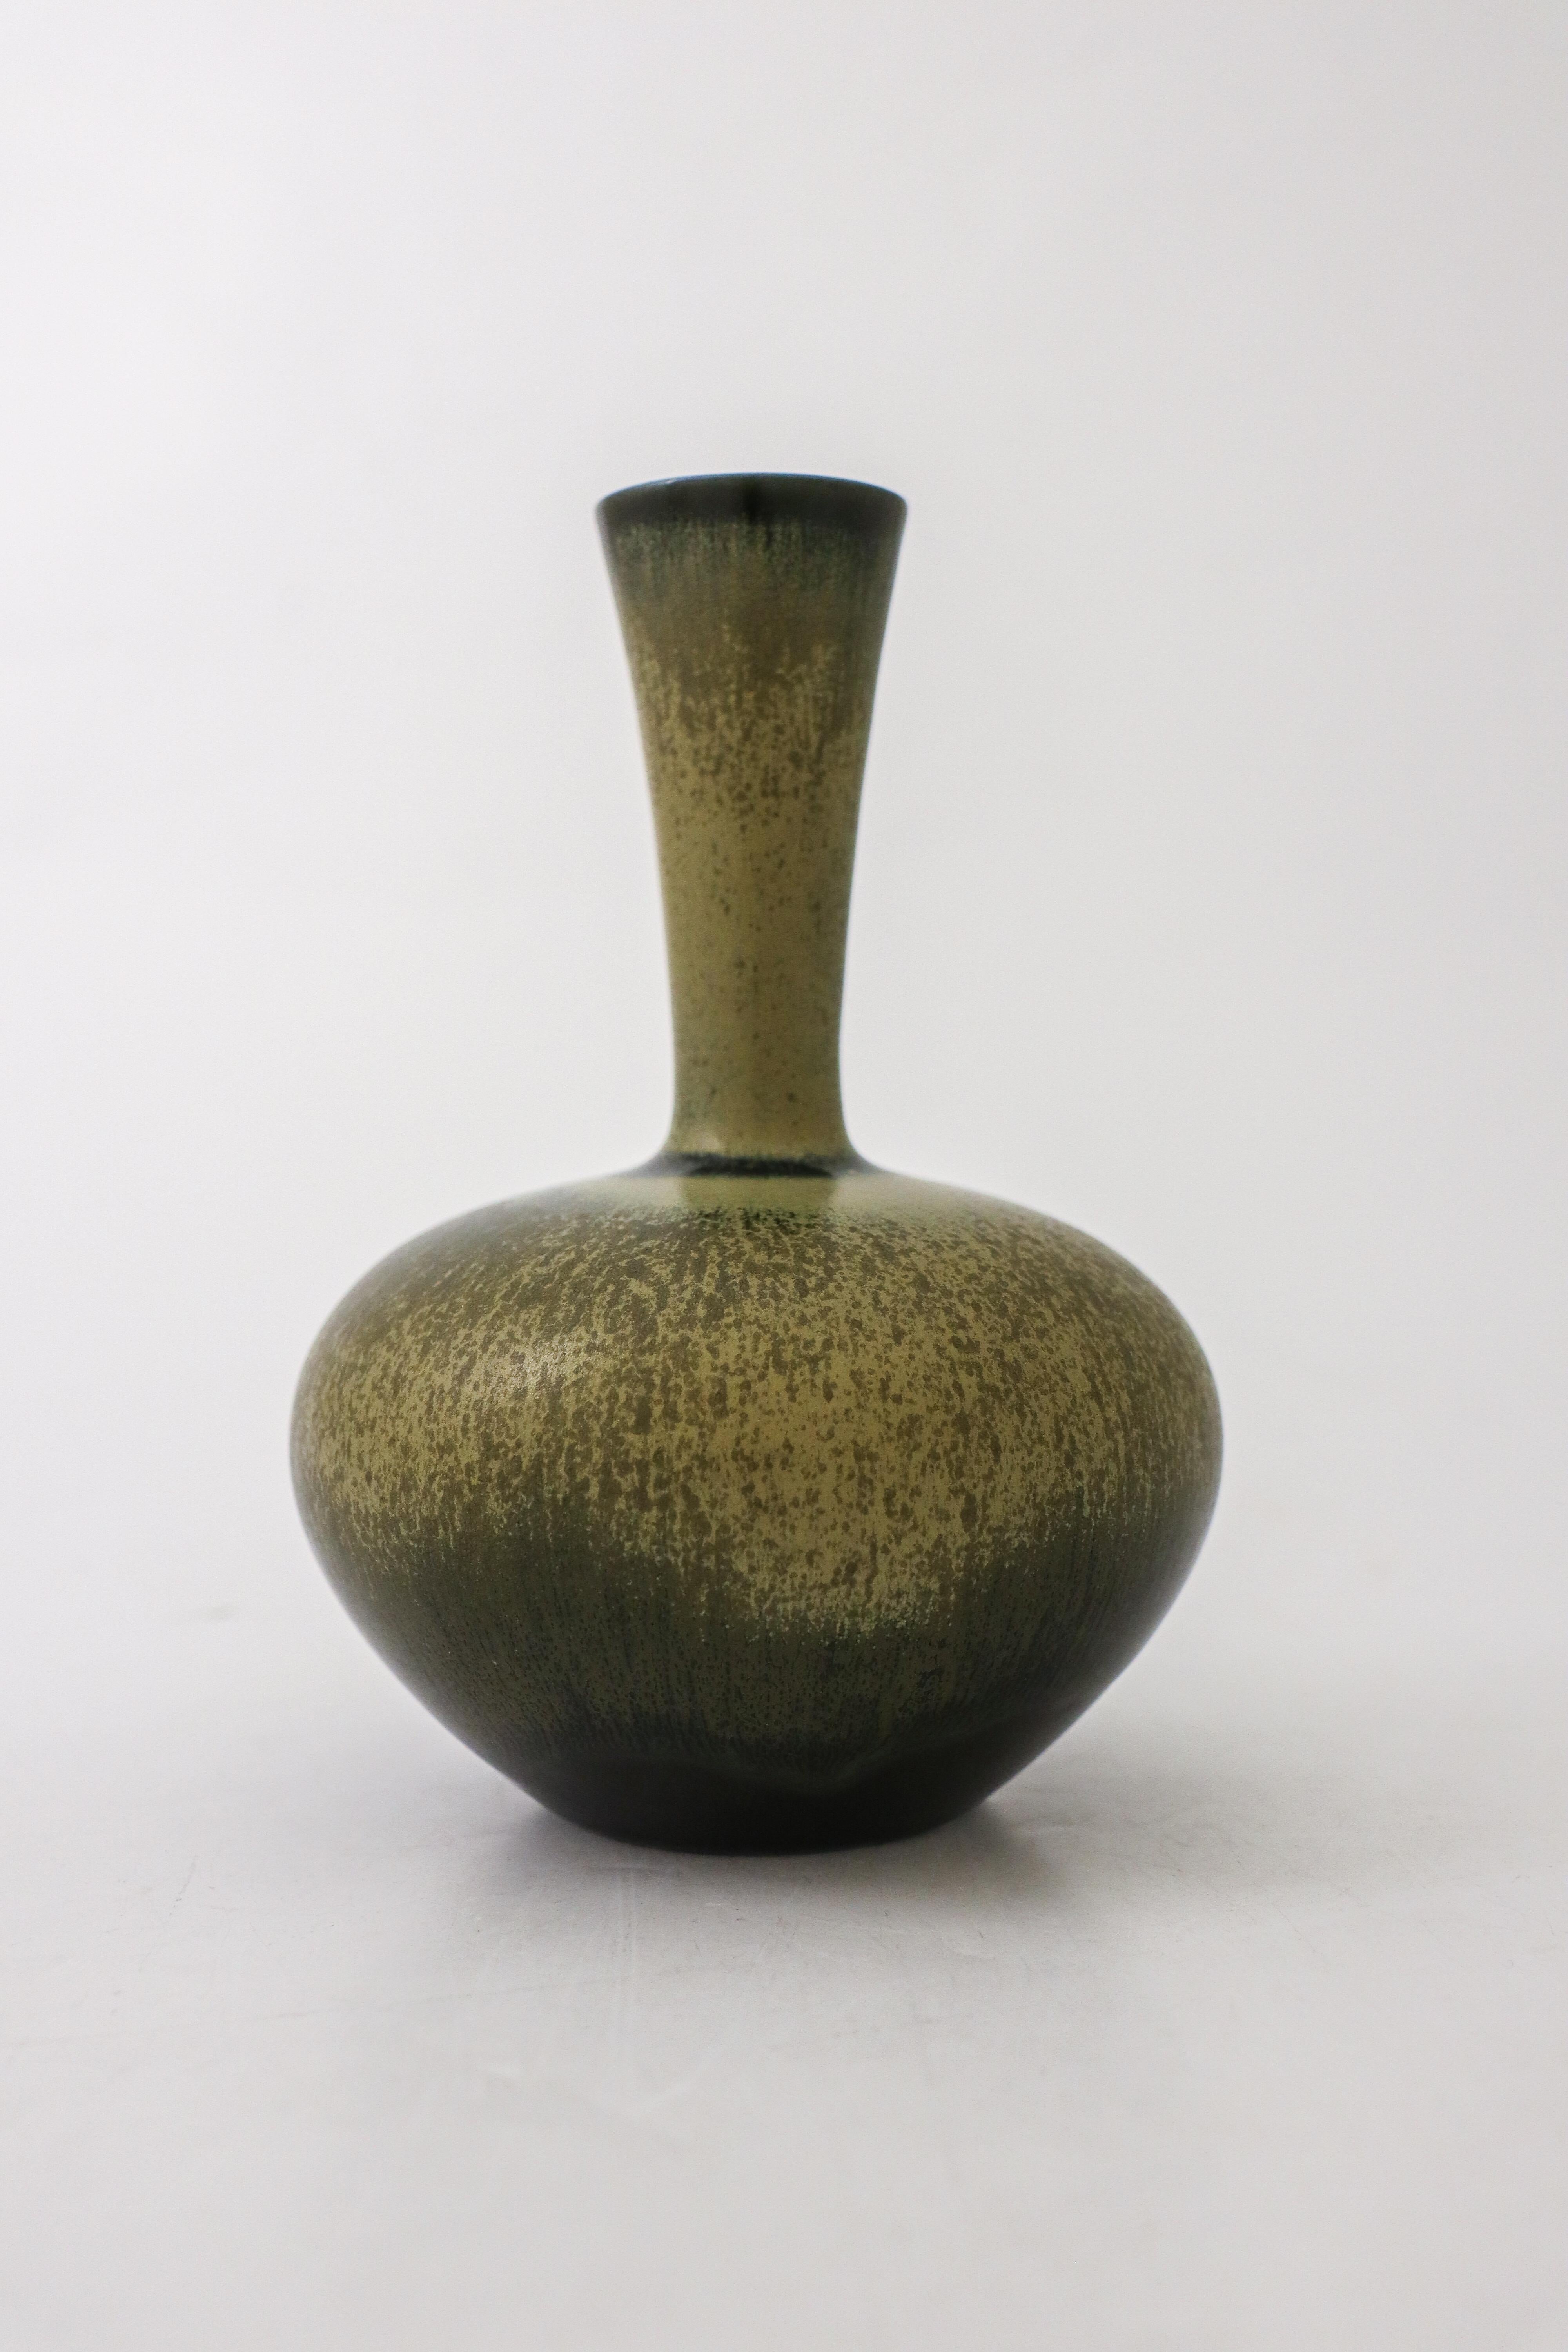 A lovely dark green vase with a har fur glaze designed by Sven Wejsfelt at Gustavsberg in Stockholm in 1986. The vase is 16.5 cm high. It's marked as on picture. It is in excellent condition.